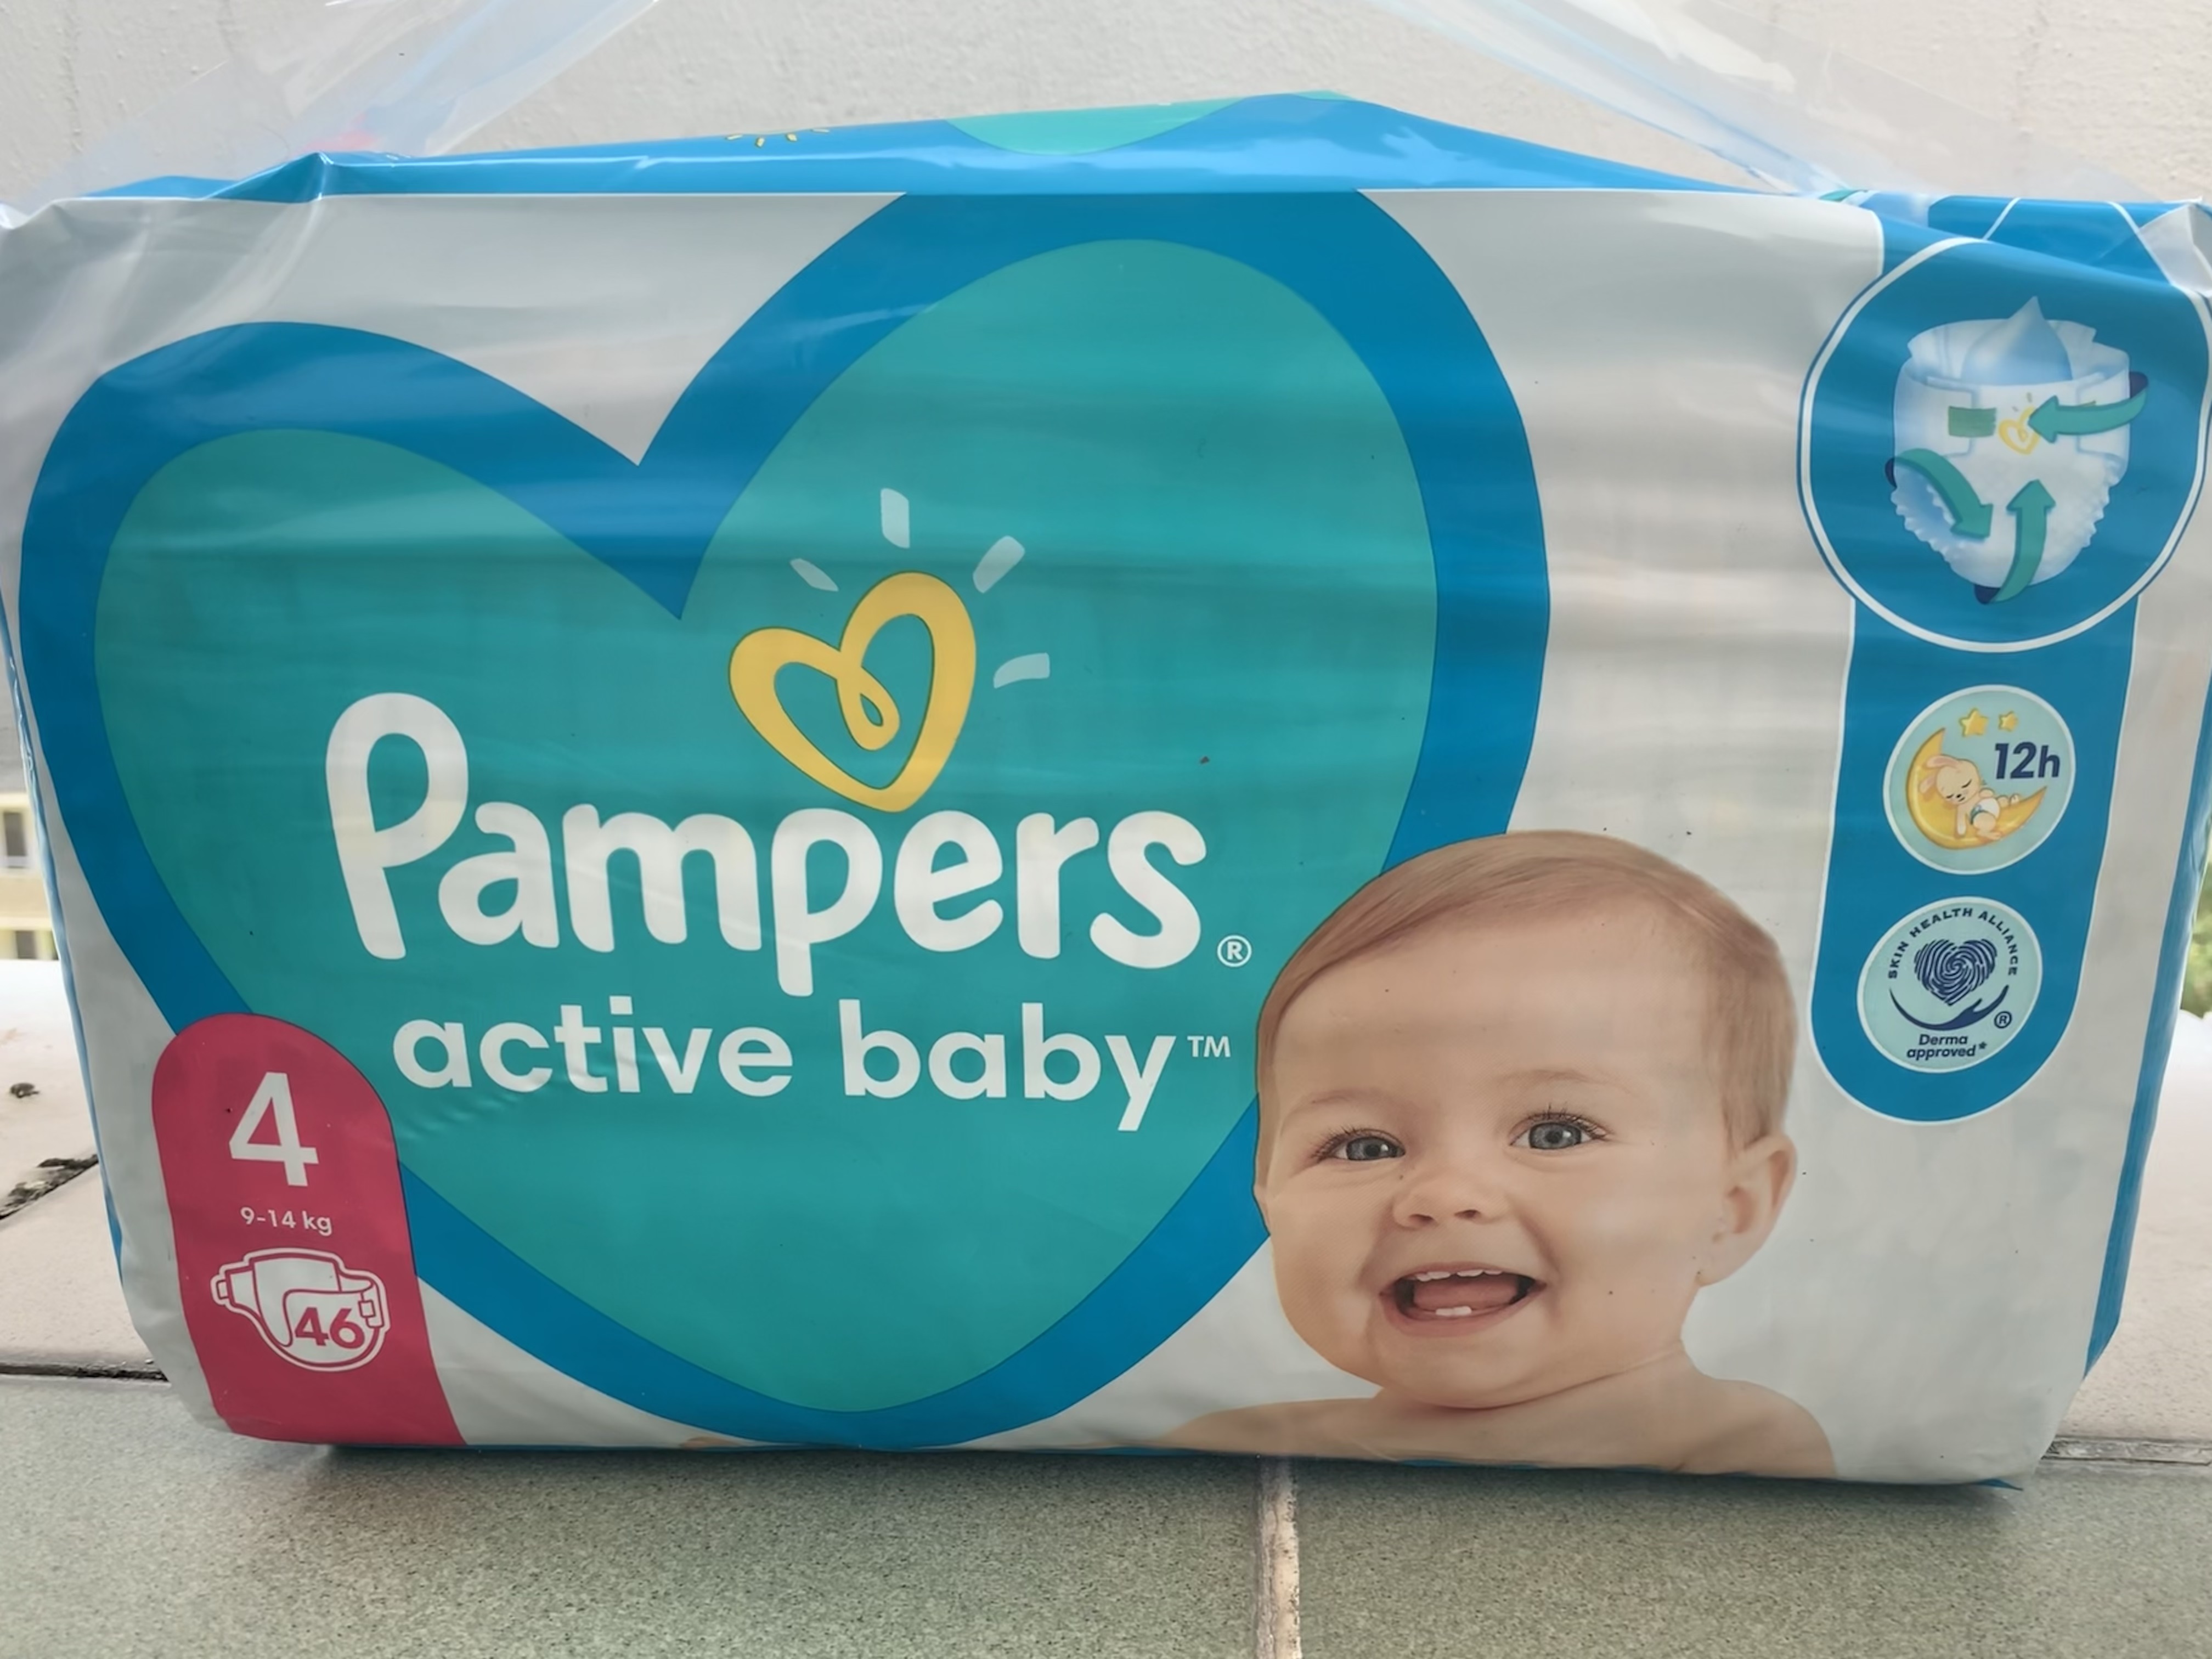 Pampers 4 46 ks ACTIVE BABY